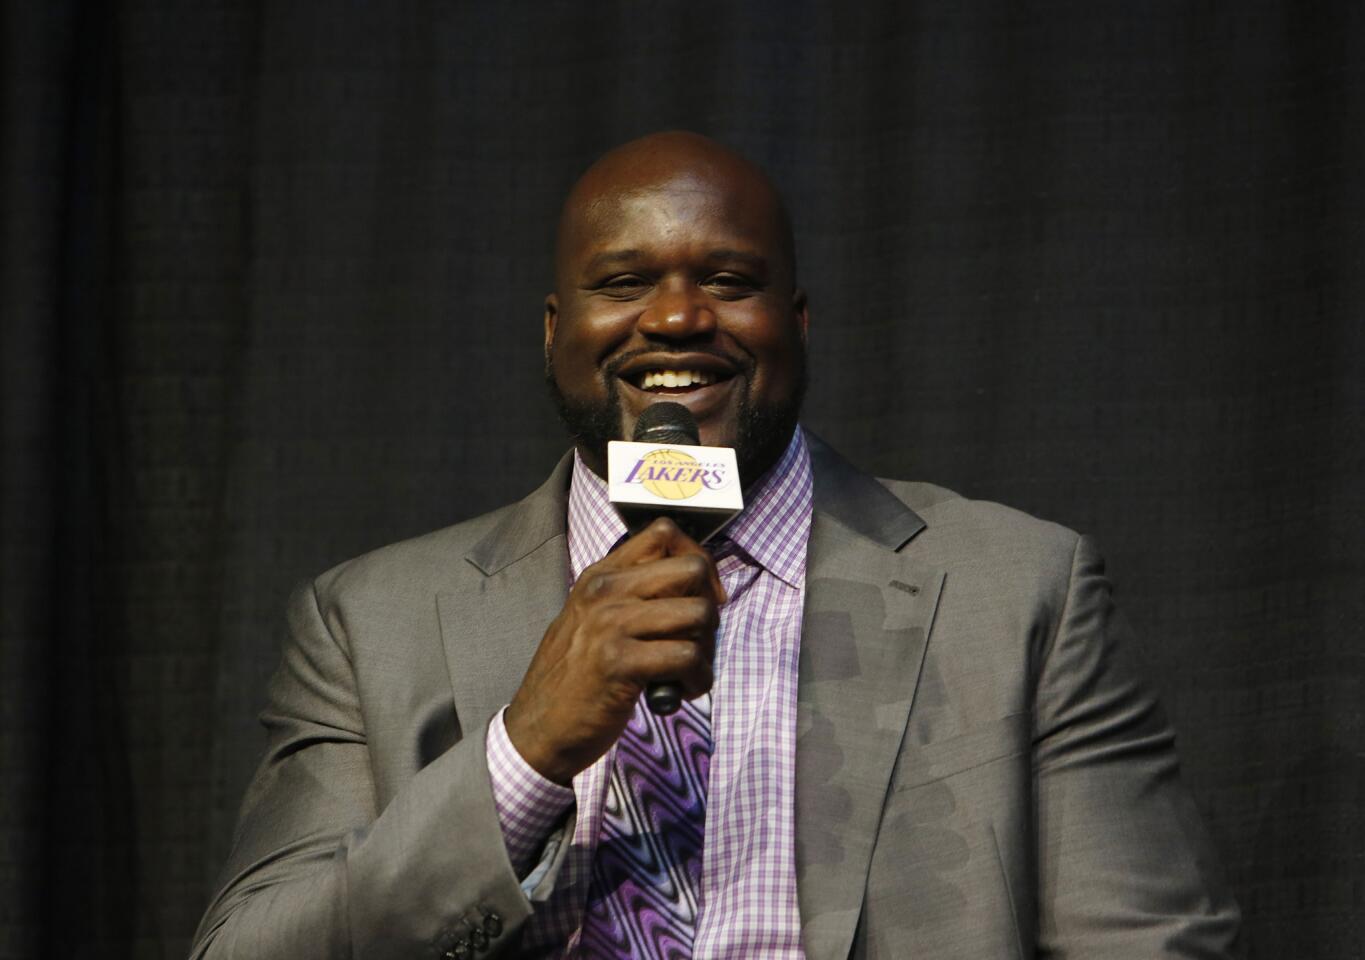 Shaquille O'Neal named finalist for Naismith Basketball Hall of Fame